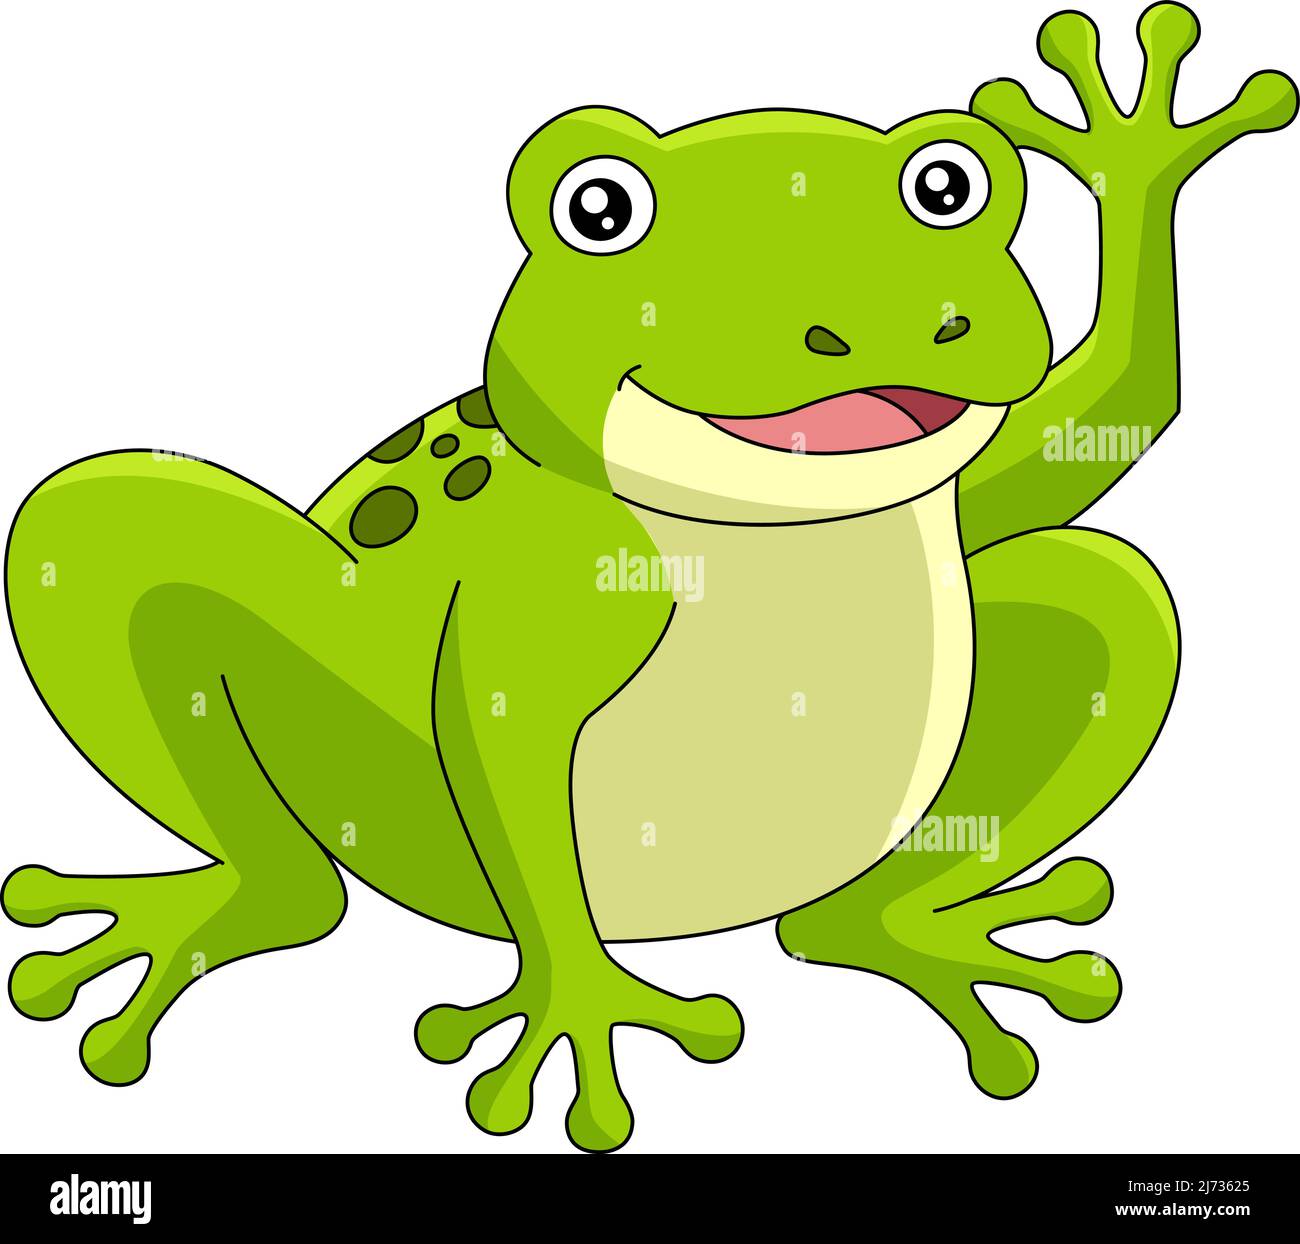 Frog Cartoon Colored Clipart Illustration Stock Vector Image & Art - Alamy